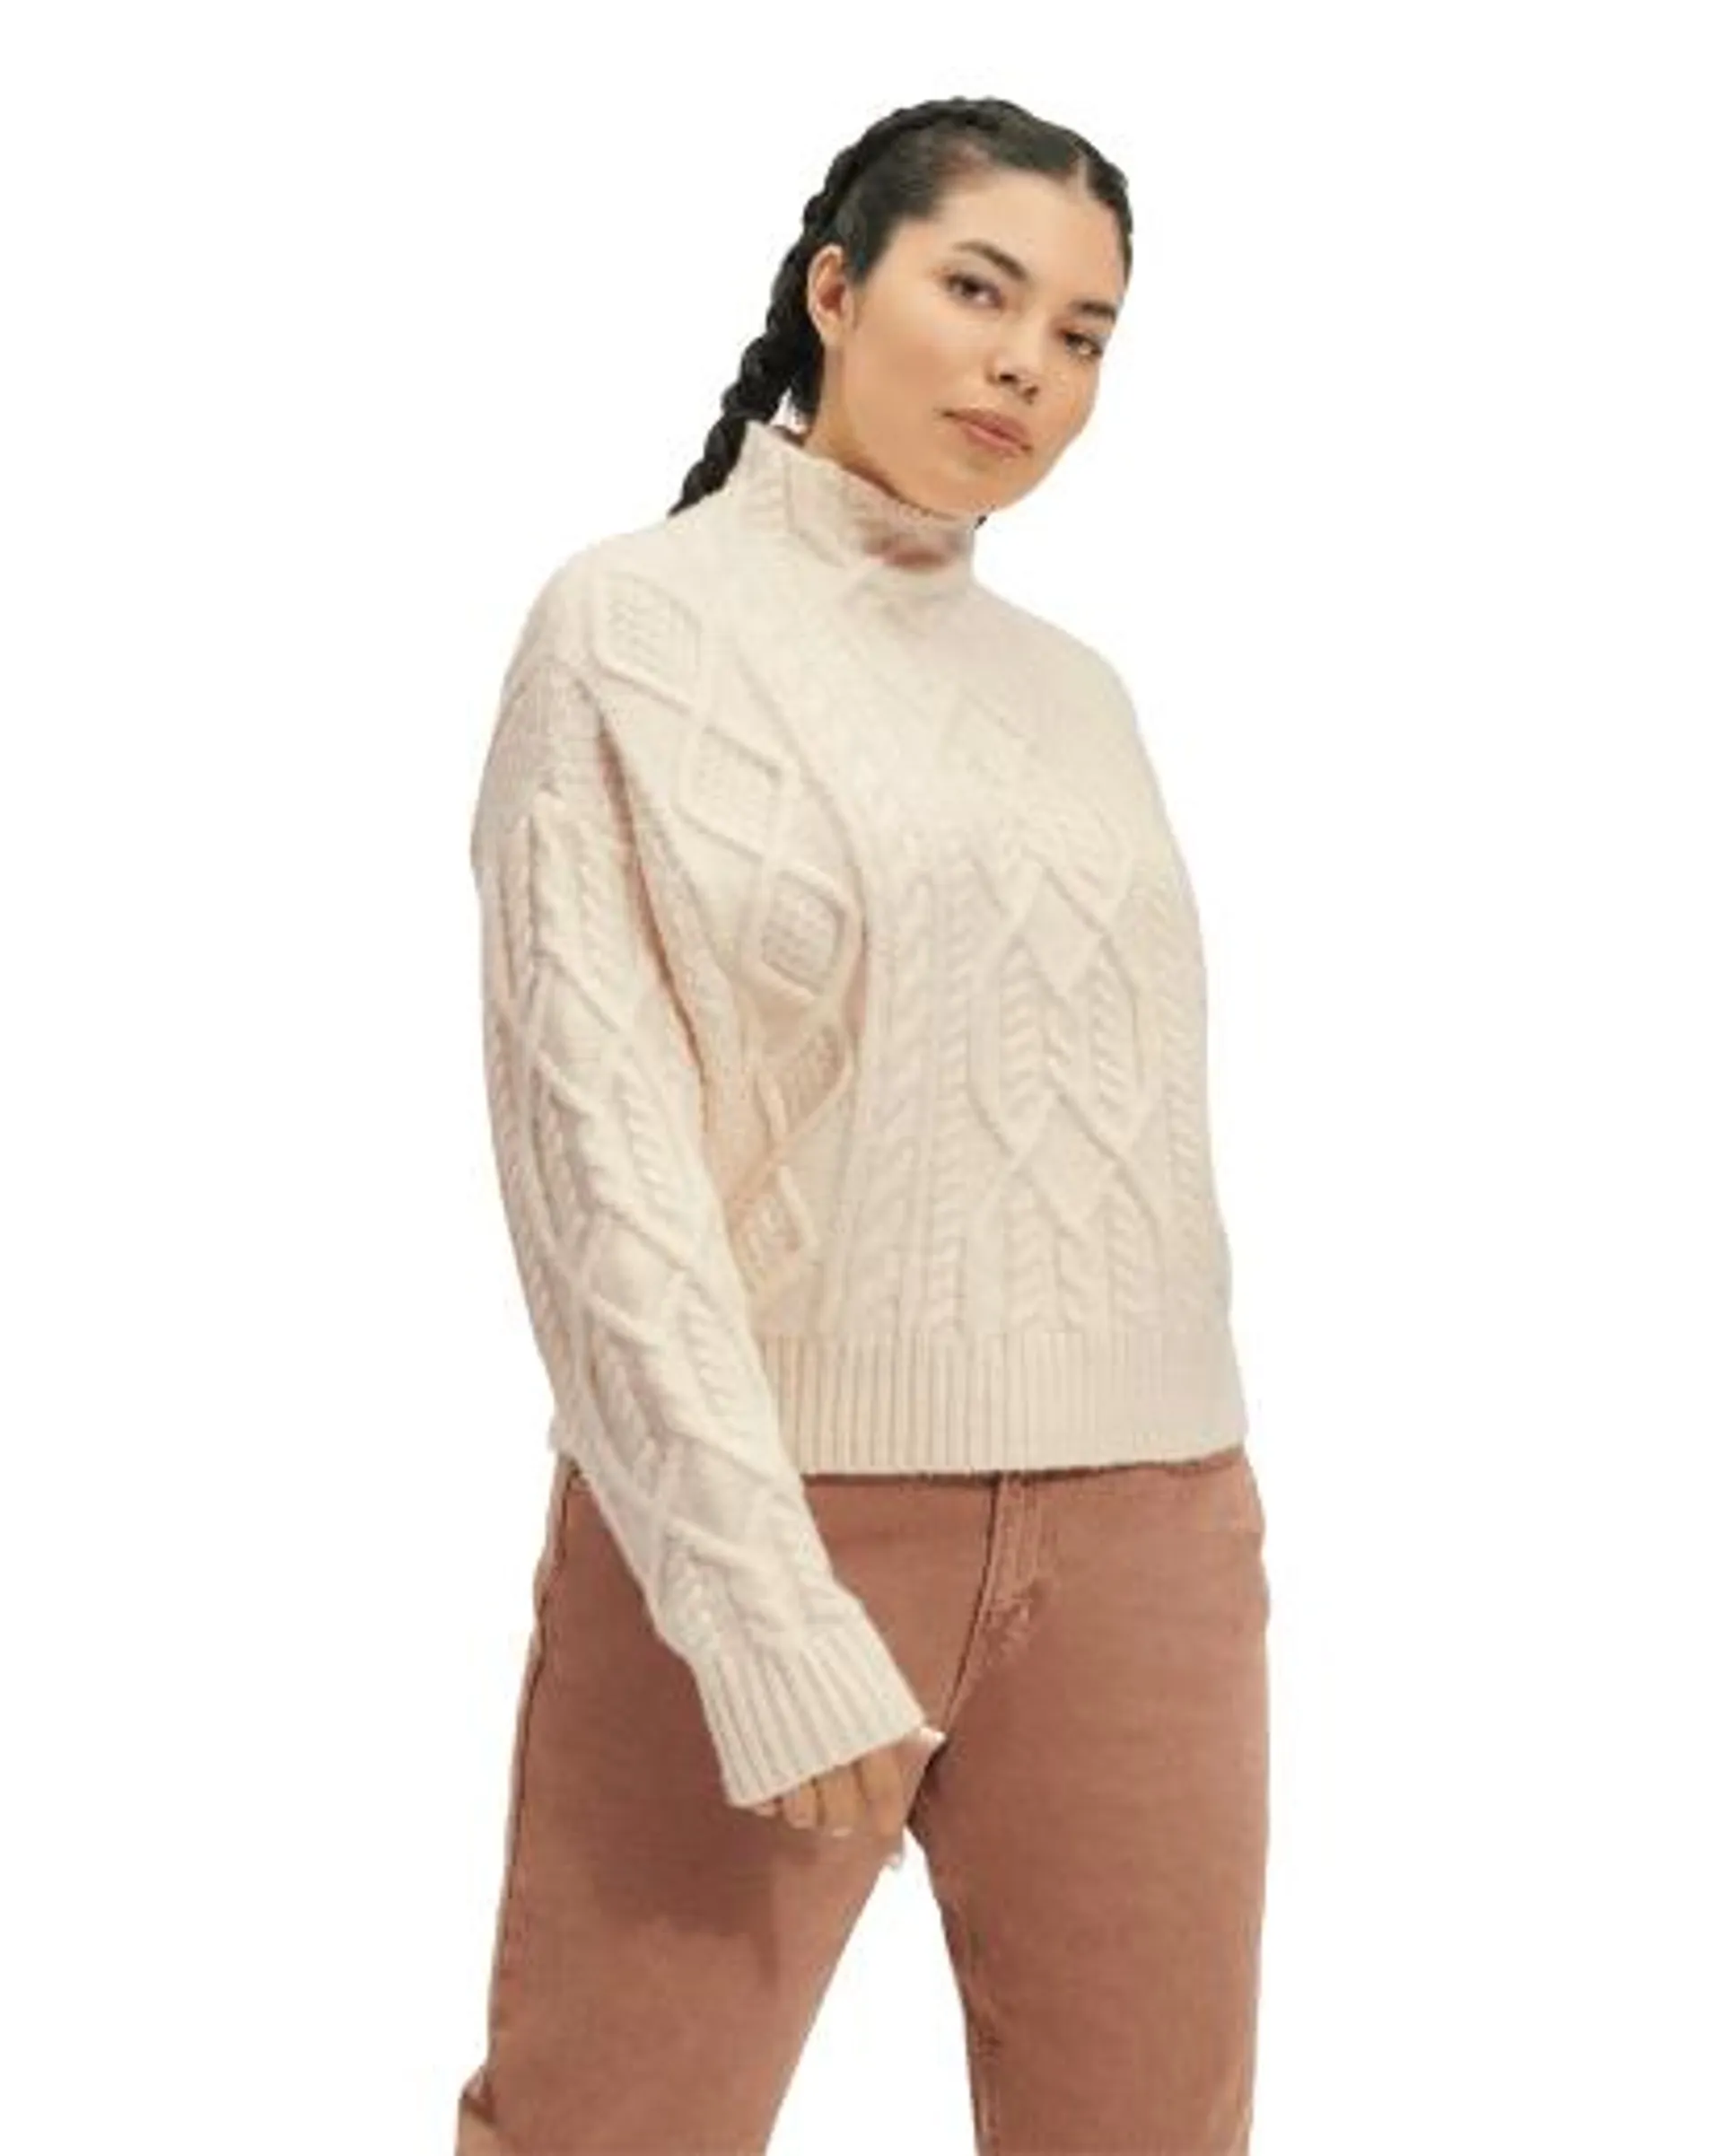 Janae Cable Knit Sweater